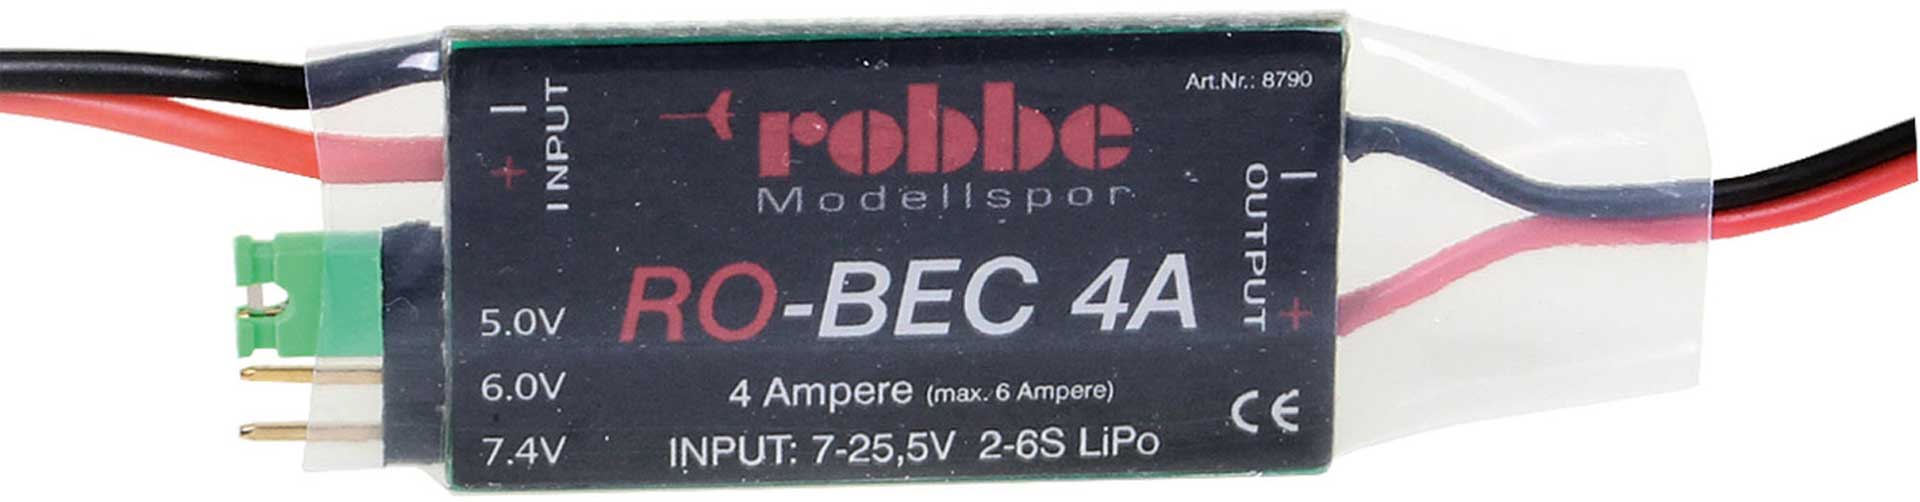 Robbe Modellsport RO-BEC 4A RECEIVER POWER SUPPLY